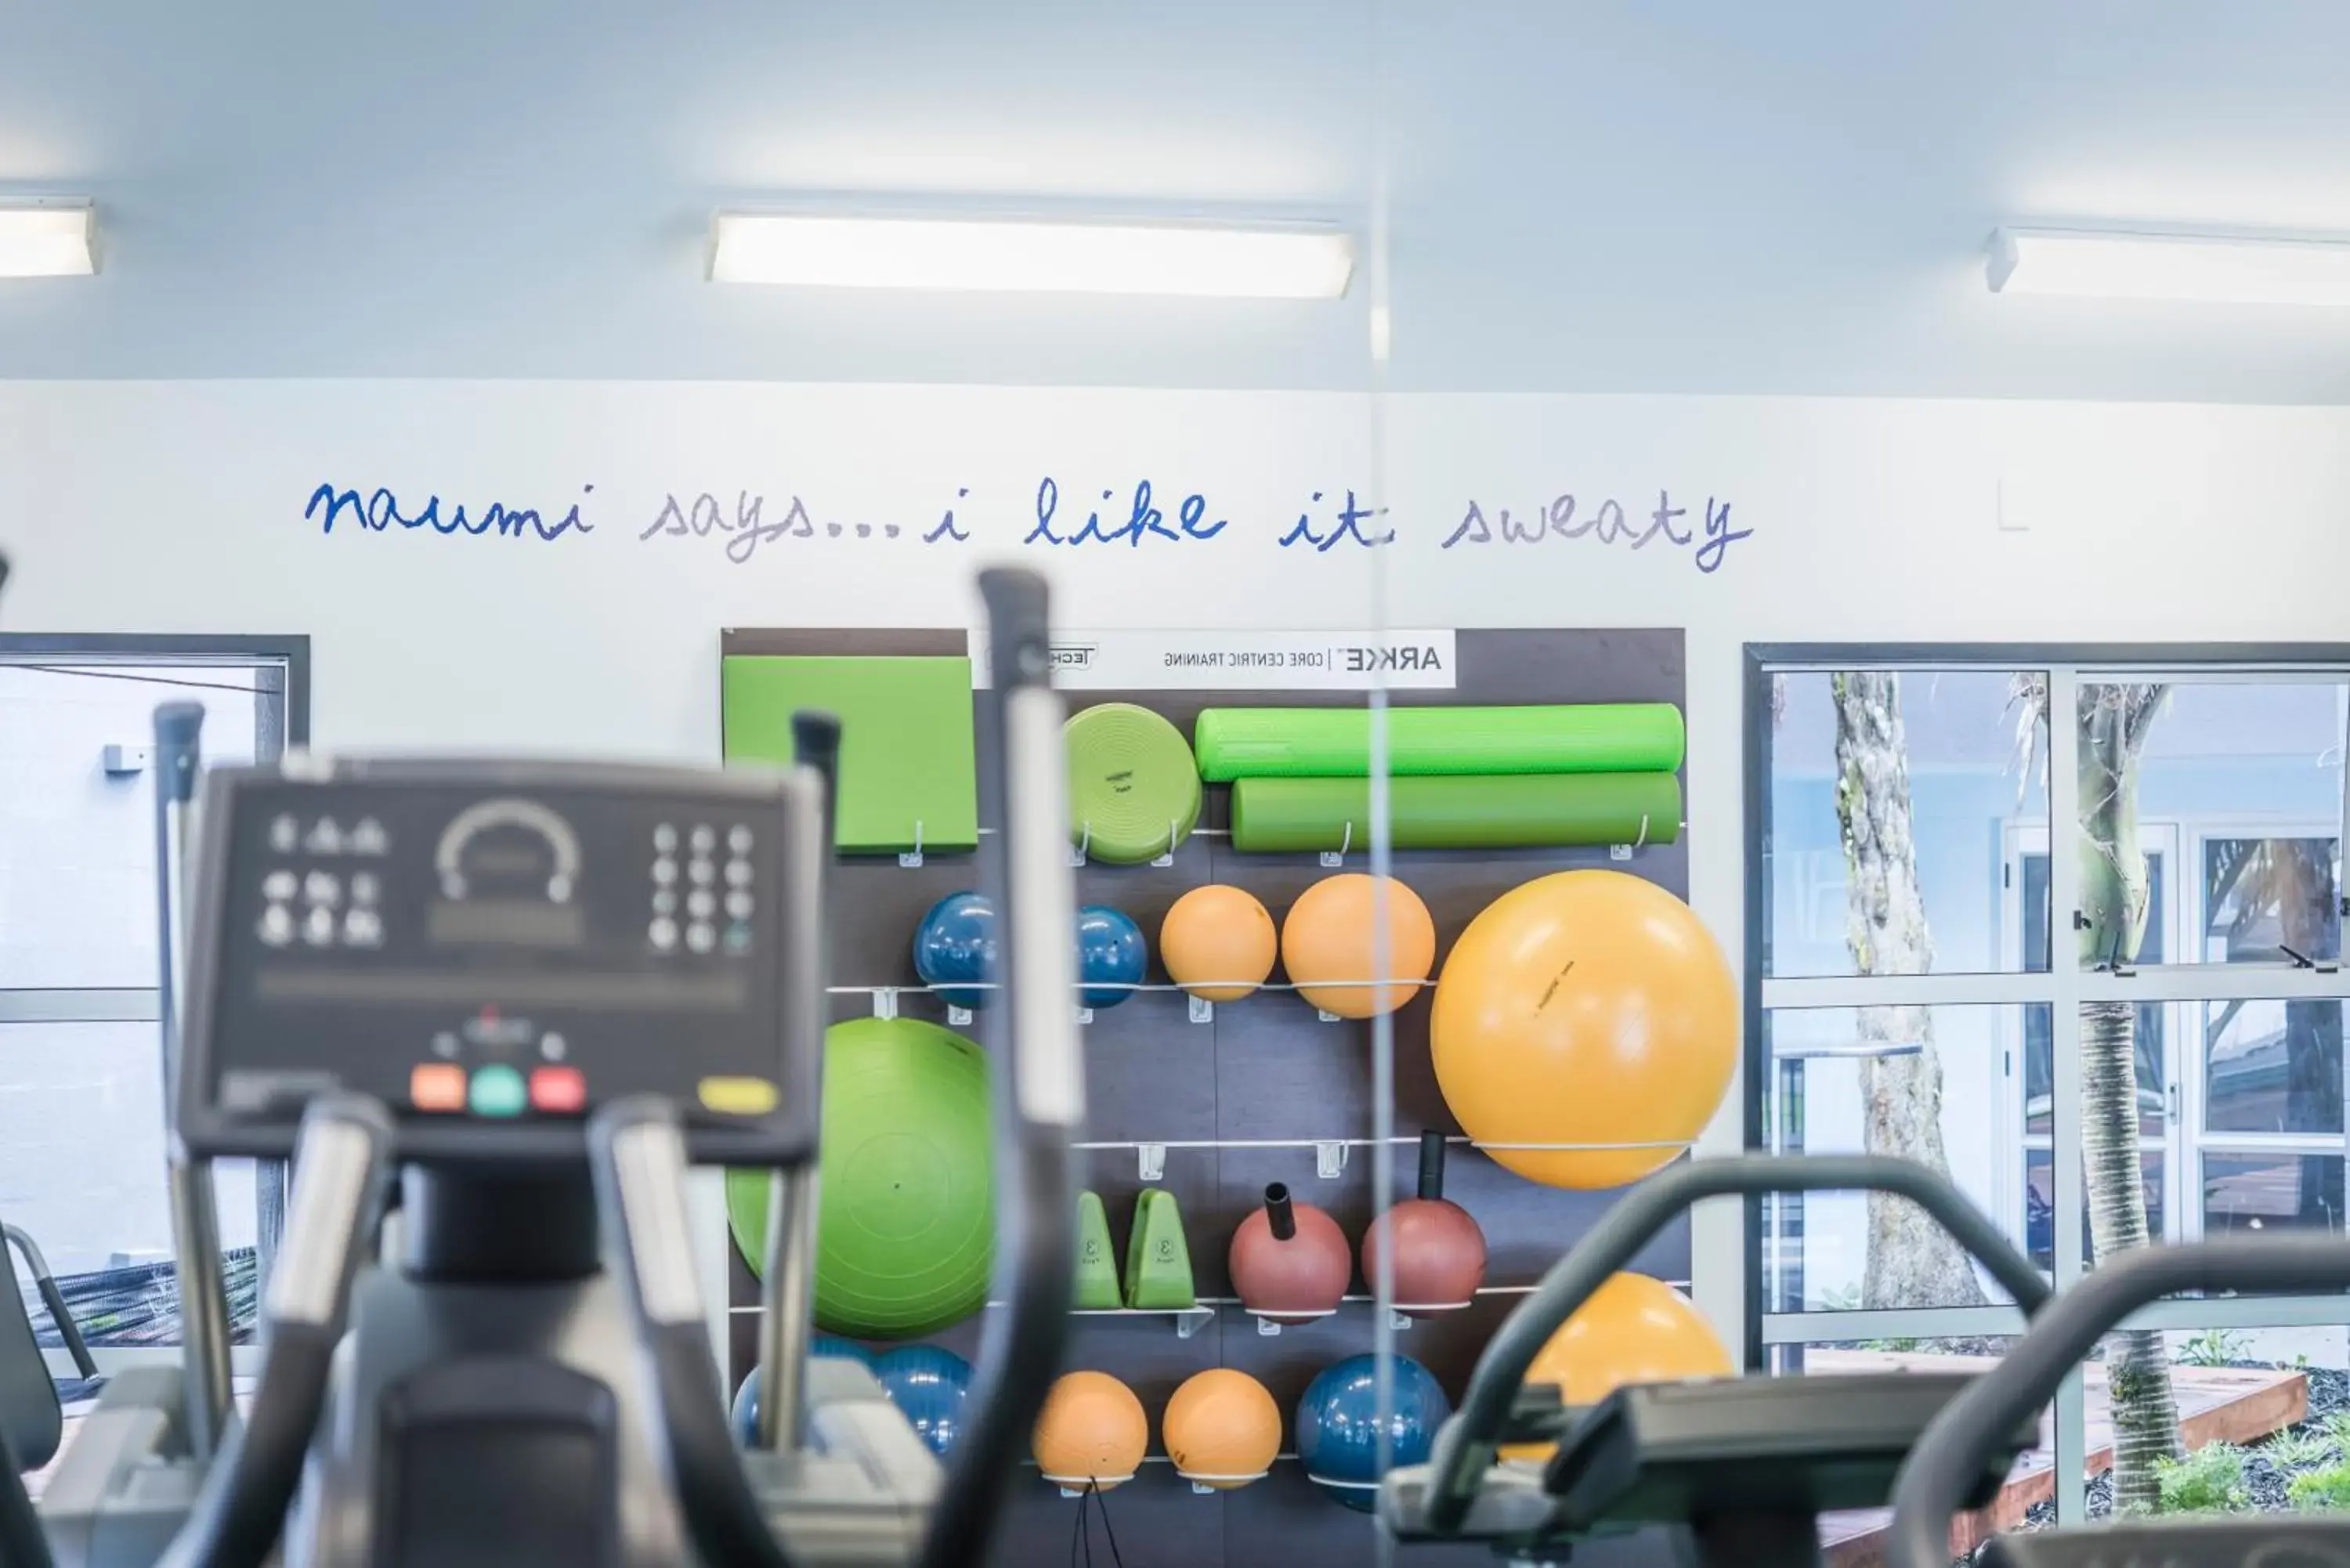 Fitness centre/facilities, Fitness Center/Facilities in Naumi Auckland Airport Hotel